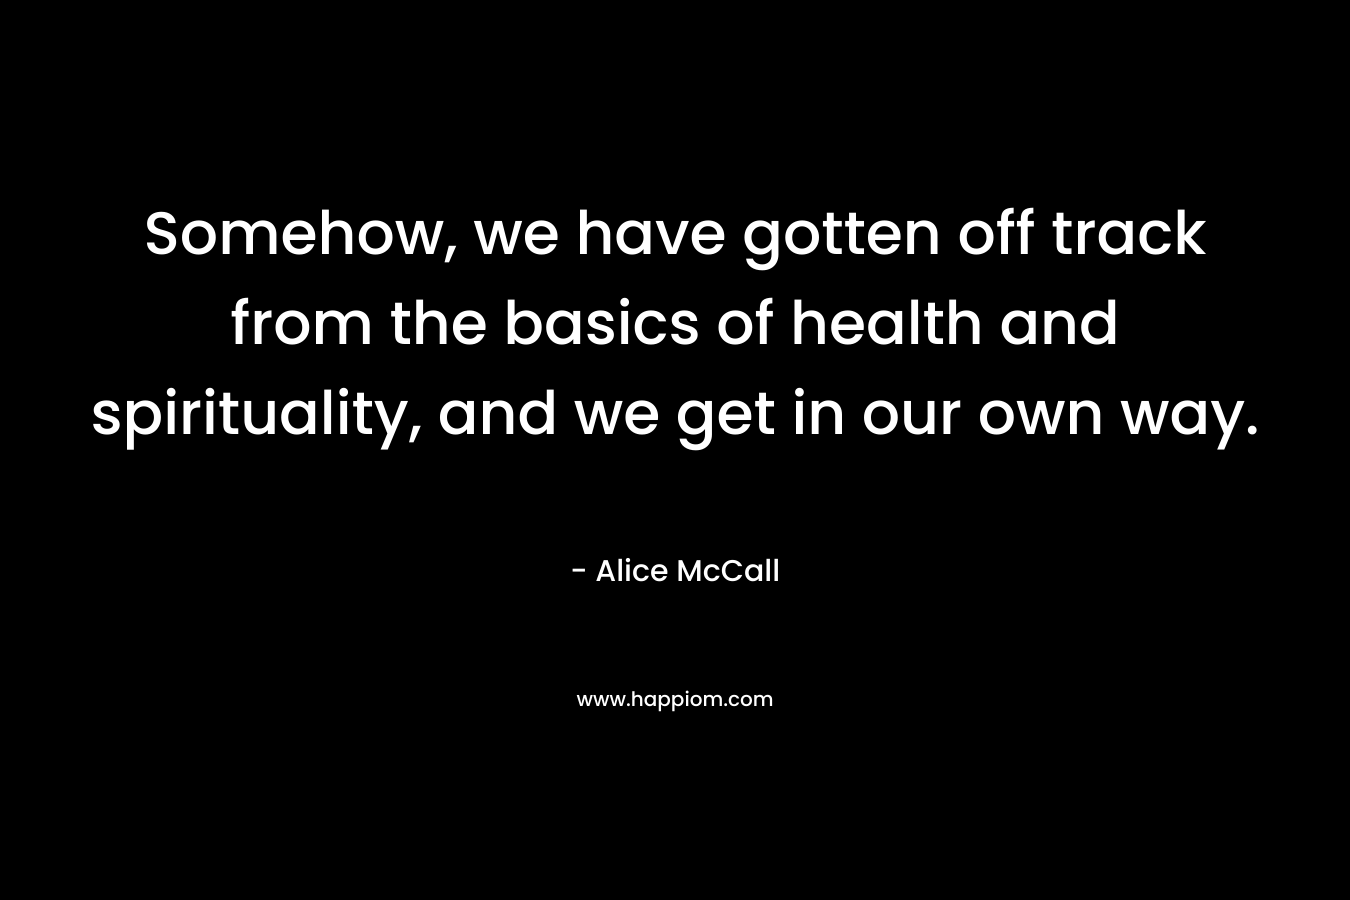 Somehow, we have gotten off track from the basics of health and spirituality, and we get in our own way. – Alice McCall